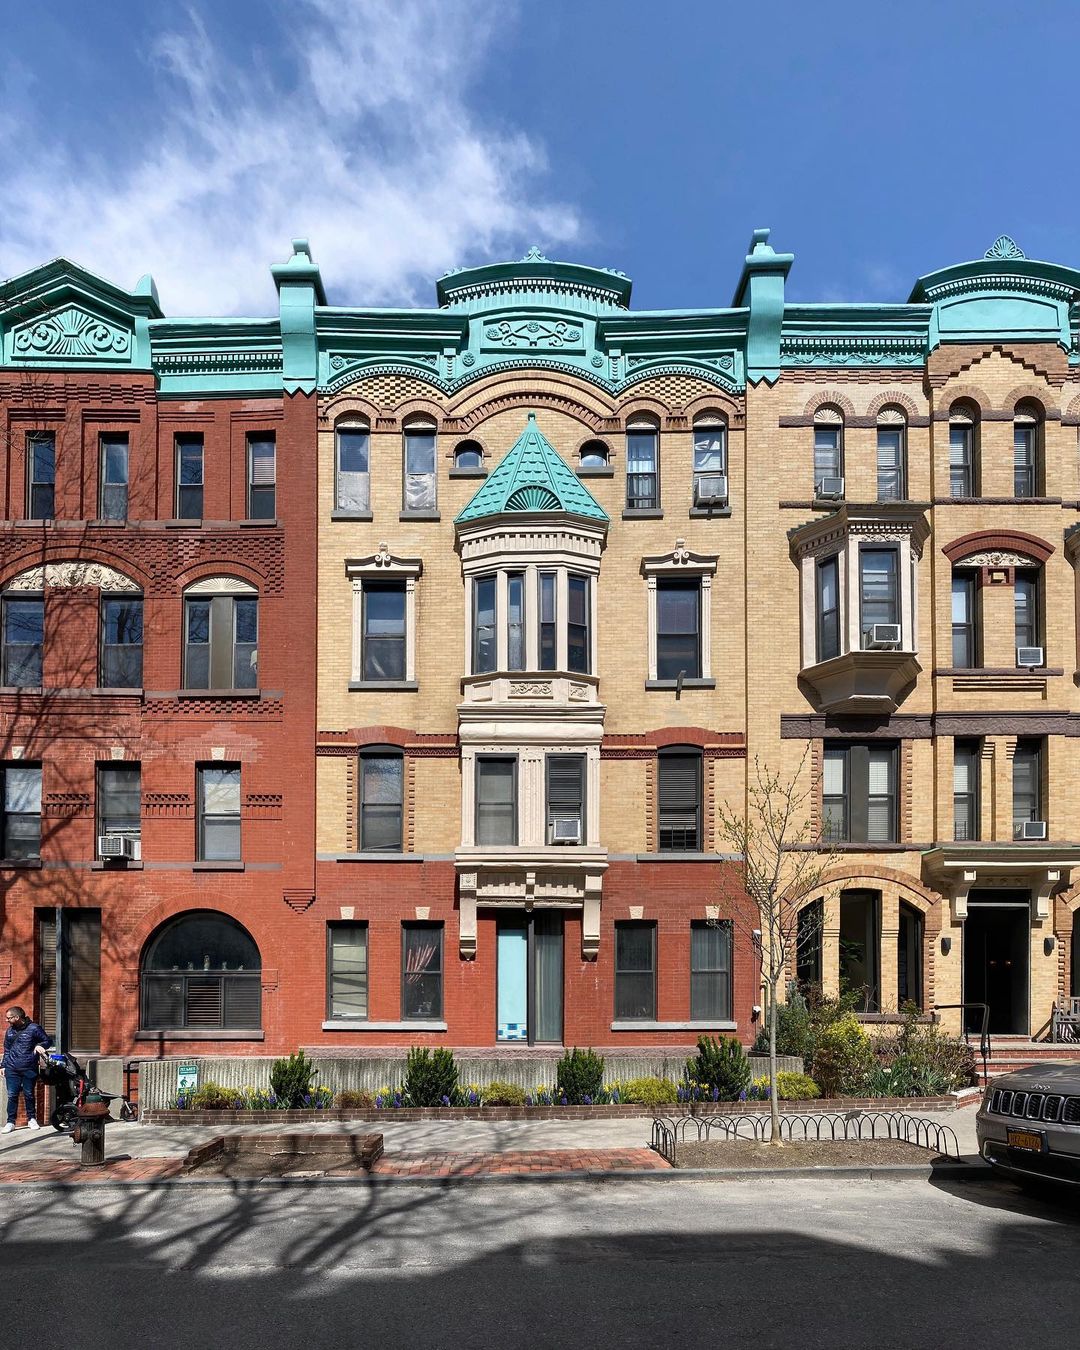 Exterior of Garfield Place in Park Slope, Brooklyn. Photo by Instagram user @bkbybike